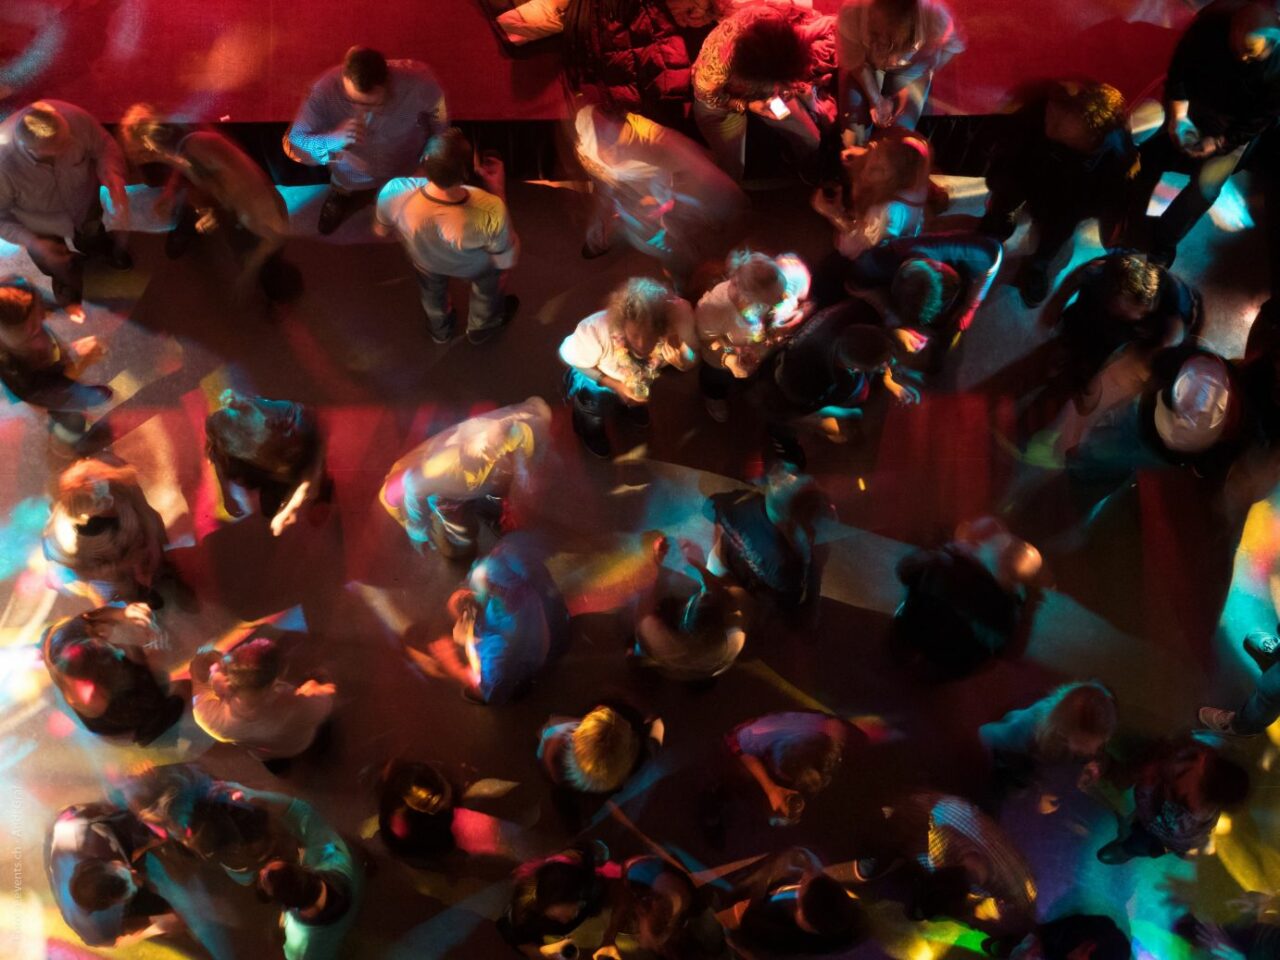 a crowded dance floor as seen from above